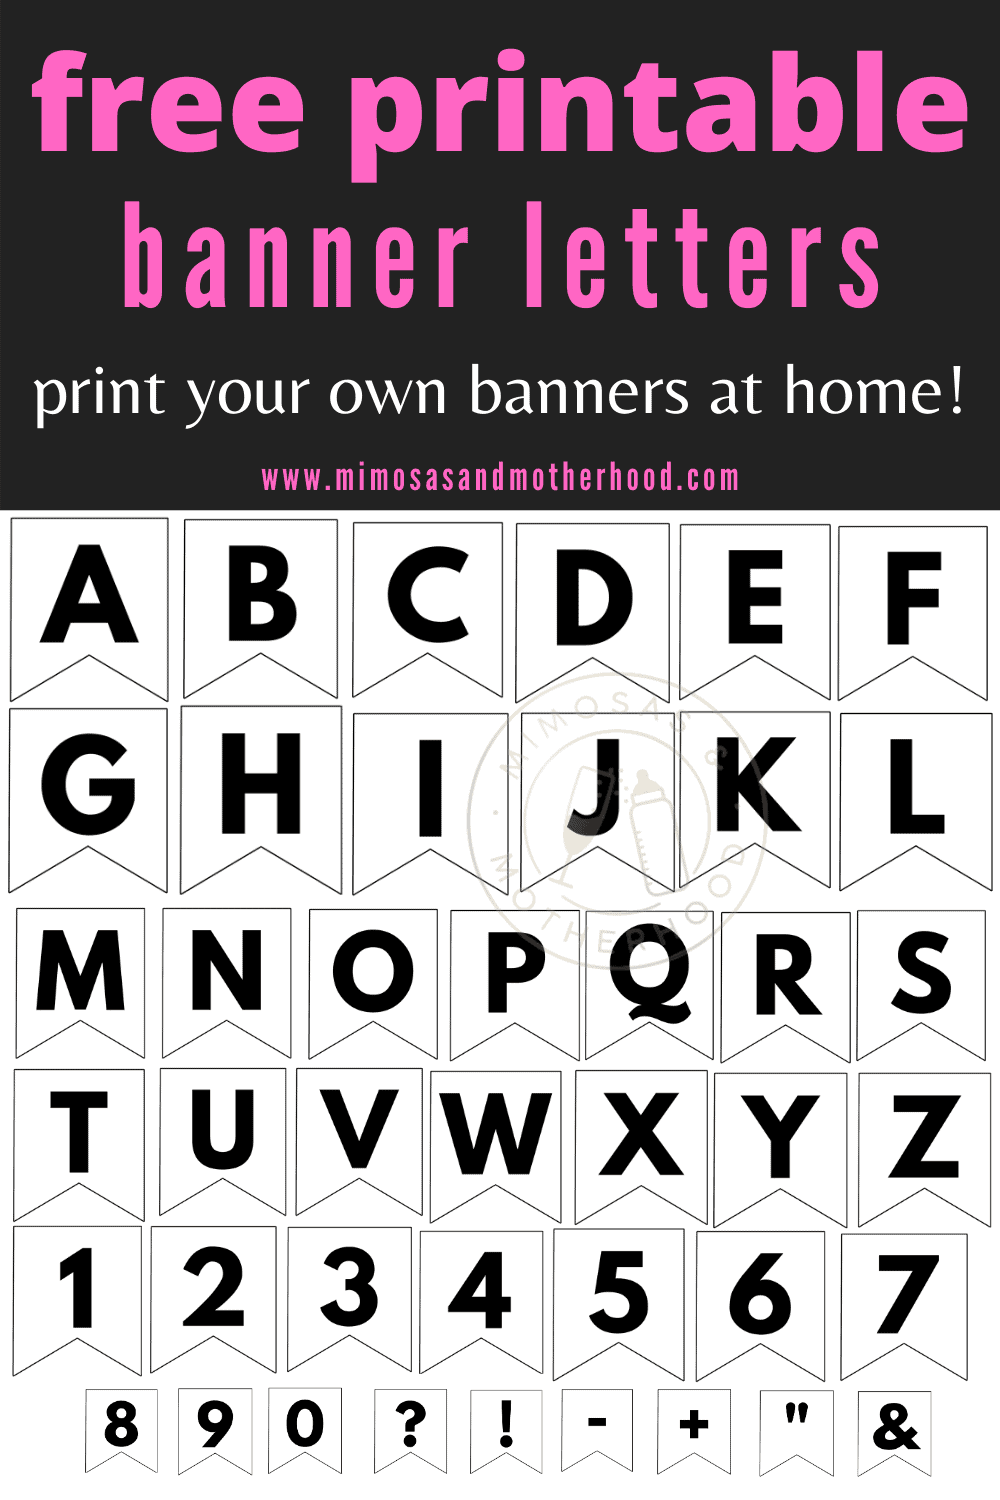 Free Printable ABC Banner Letters Template - Mimosas & Motherhood With Regard To Printable Letter Templates For Banners